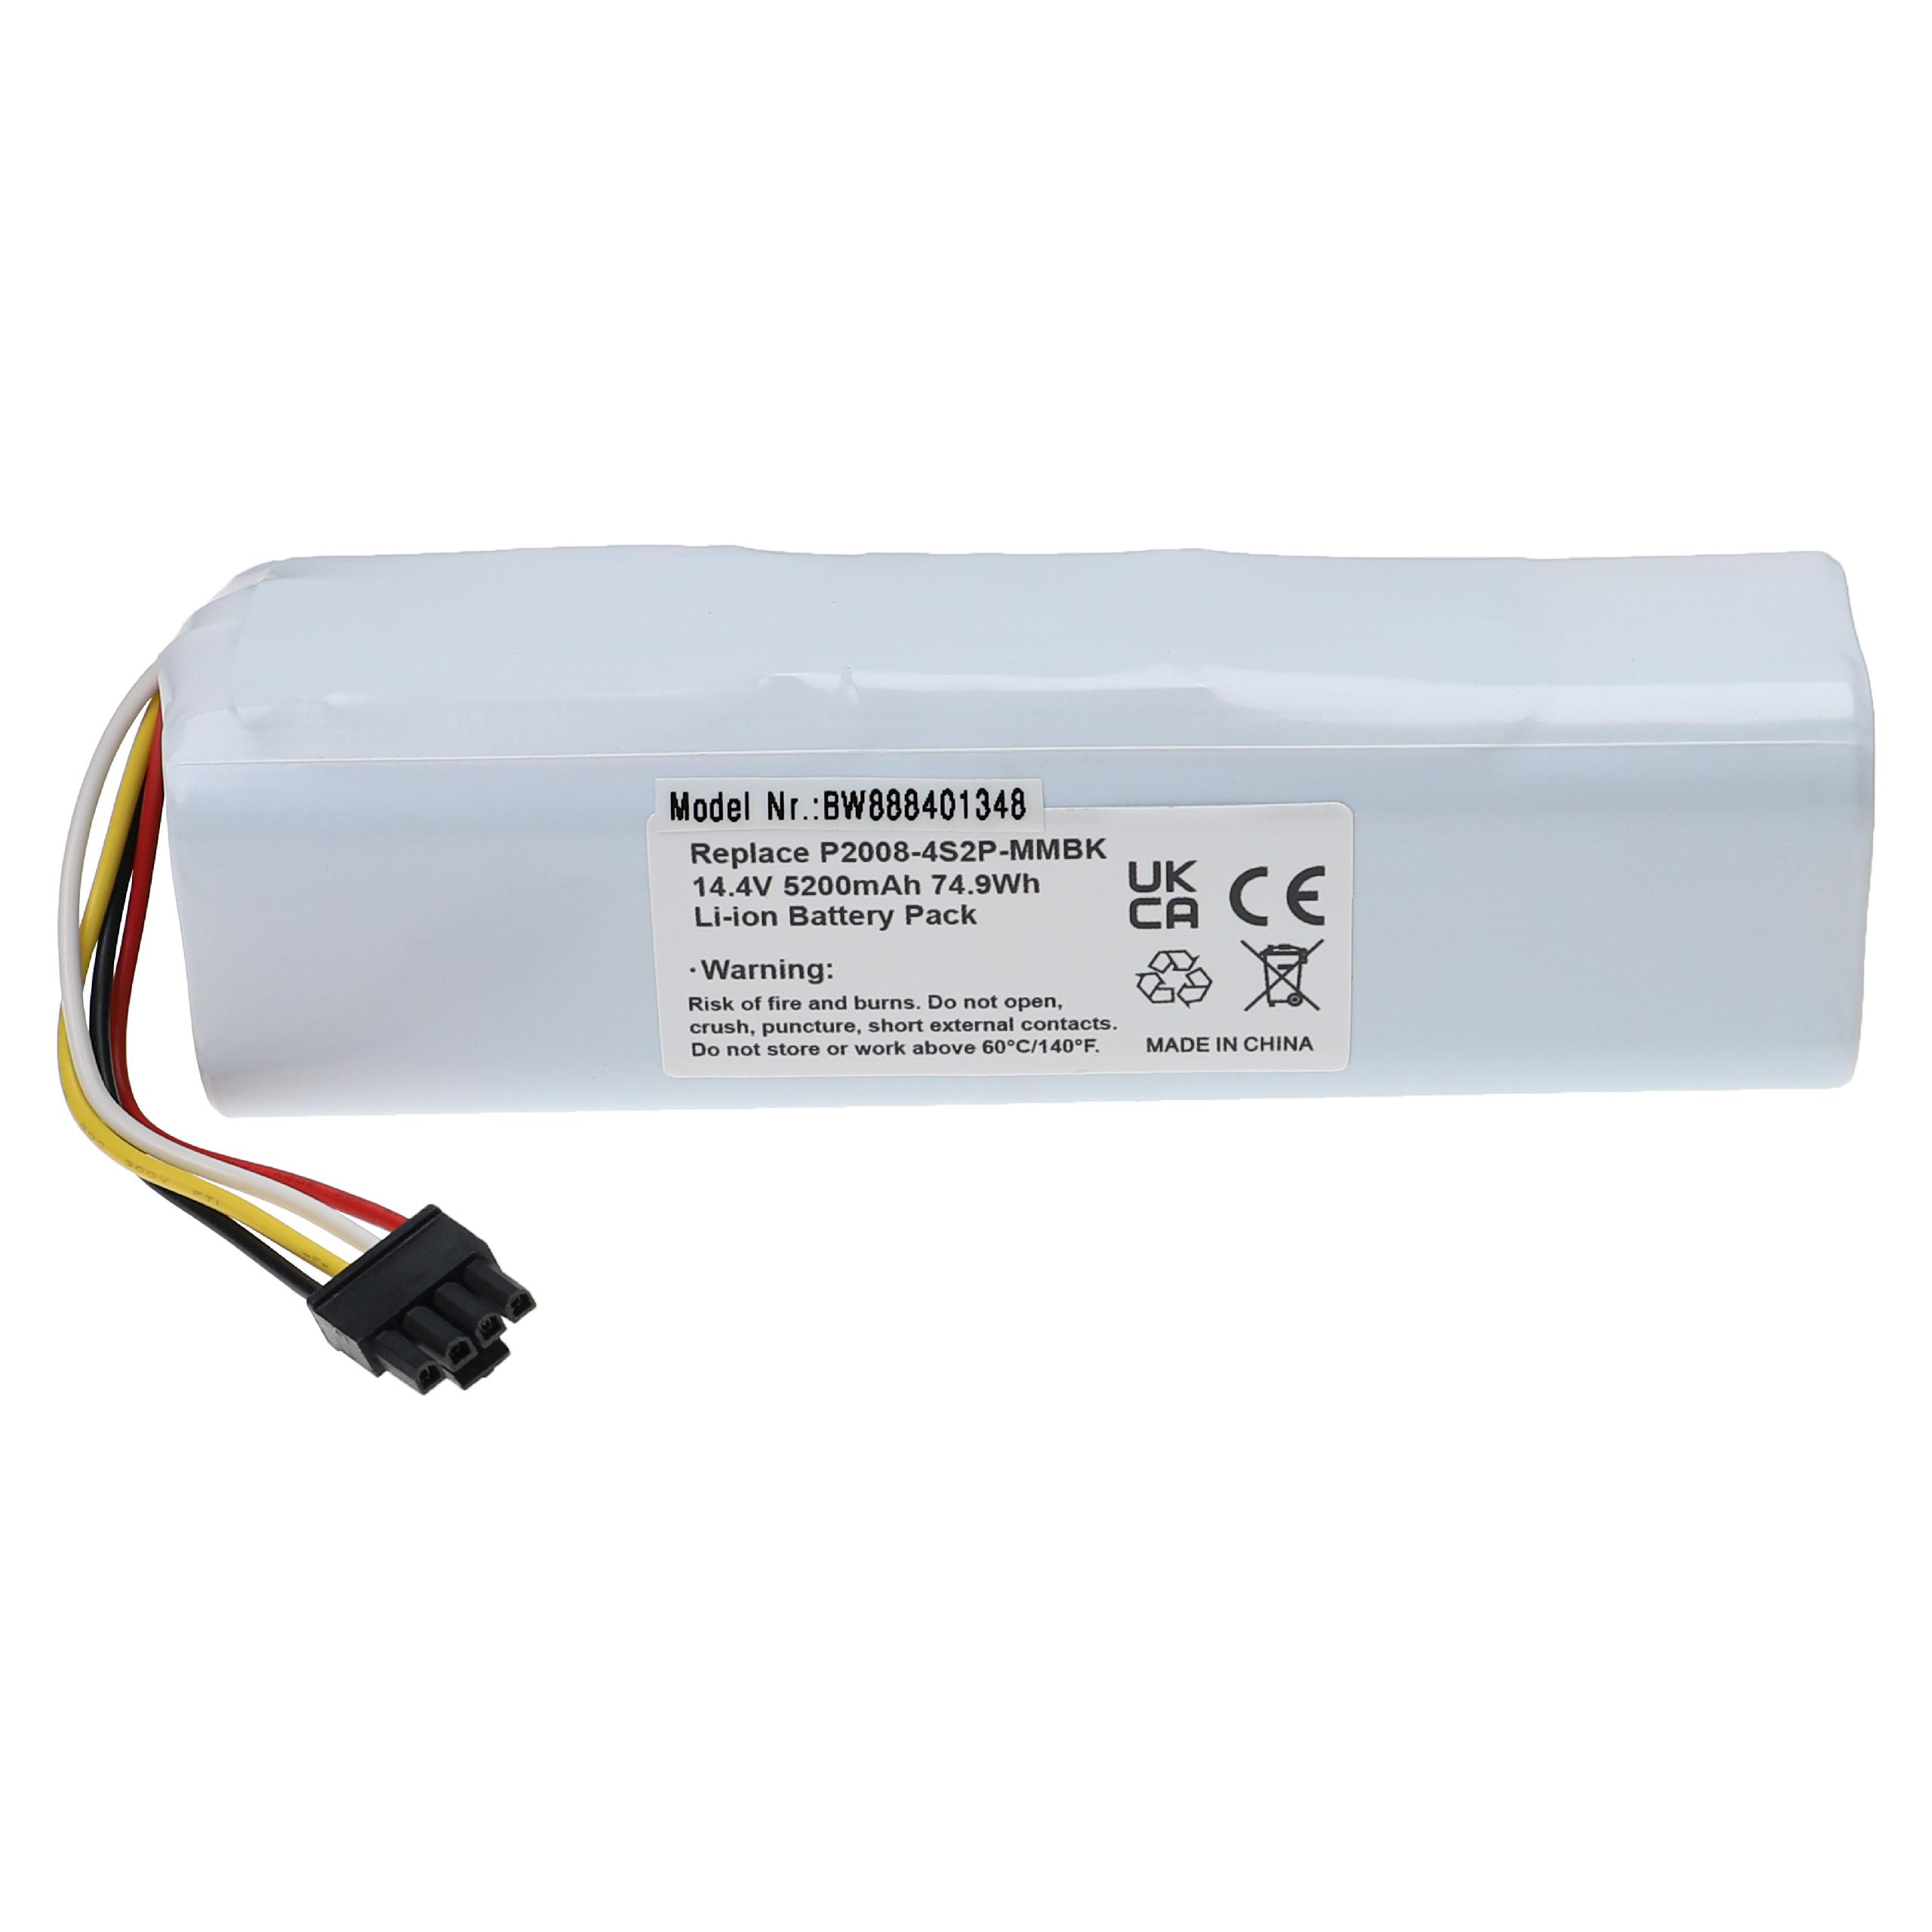 Battery Replacement for Xiaomi P2008-4S2P-MMBK for - 5200mAh, 14.4V, Li-Ion